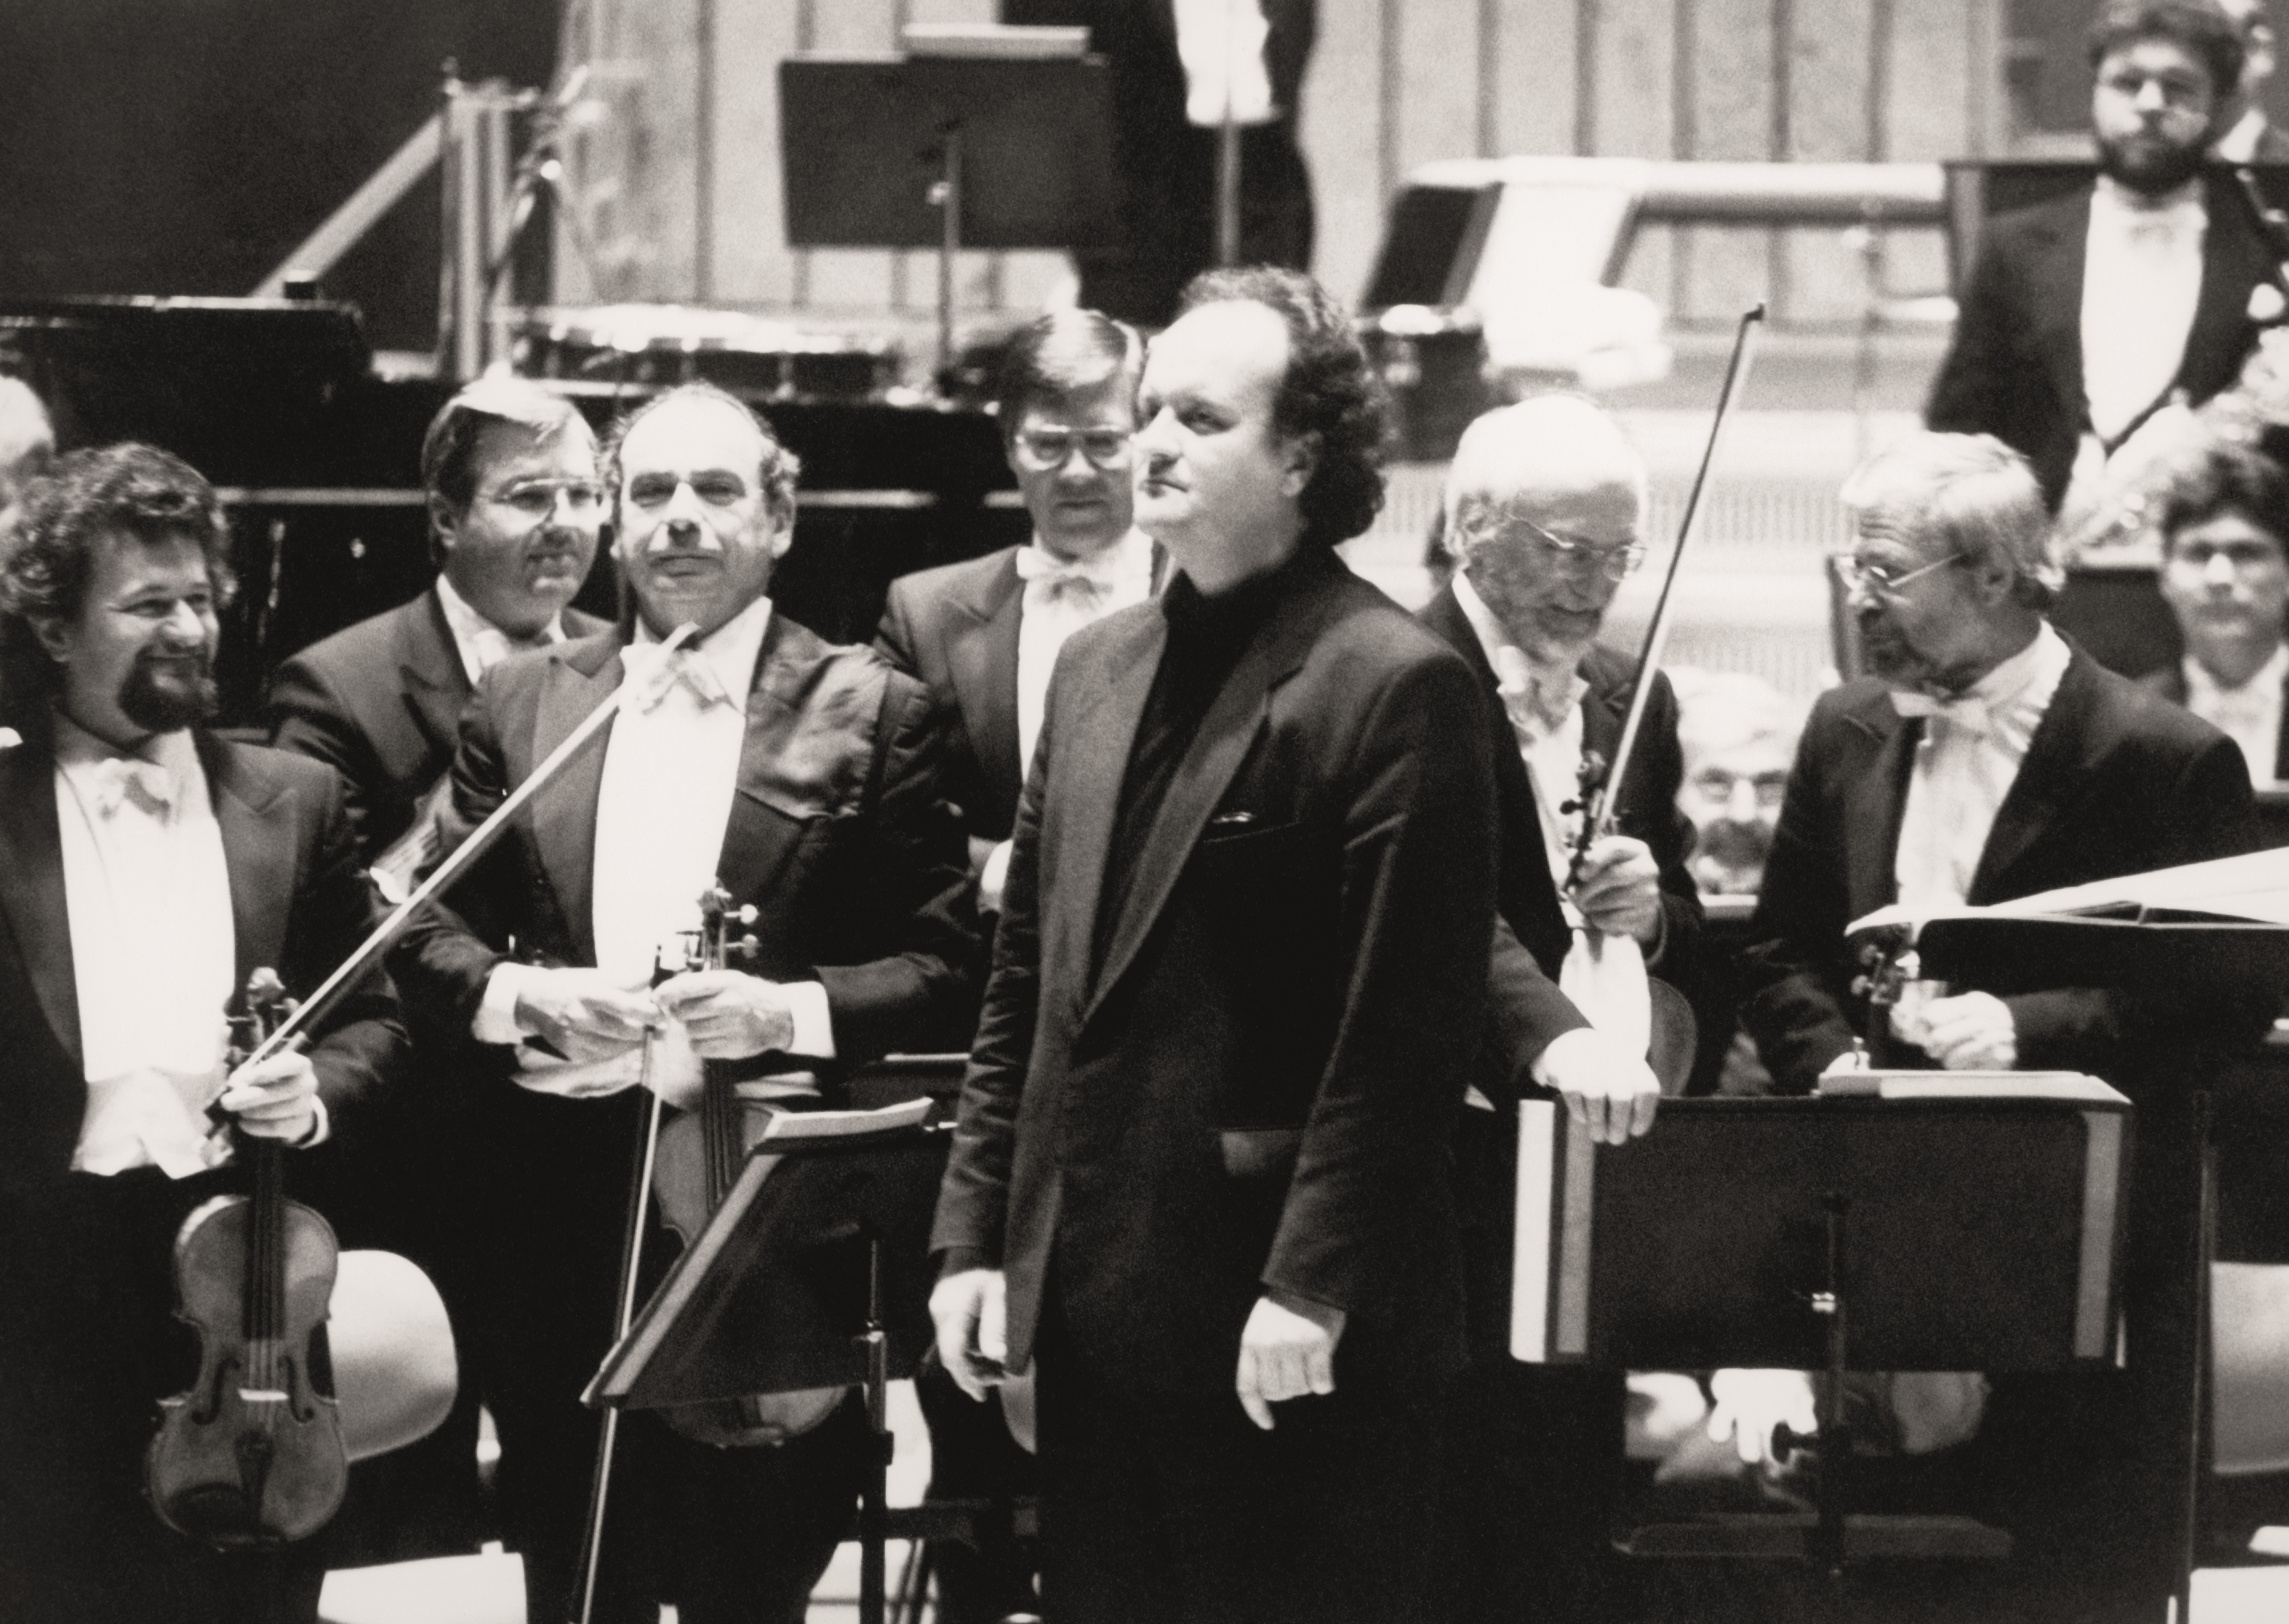 Wolfgang Rihm in a suit stands in front of the orchestra, the musicians stand and hold their instruments in their hands.